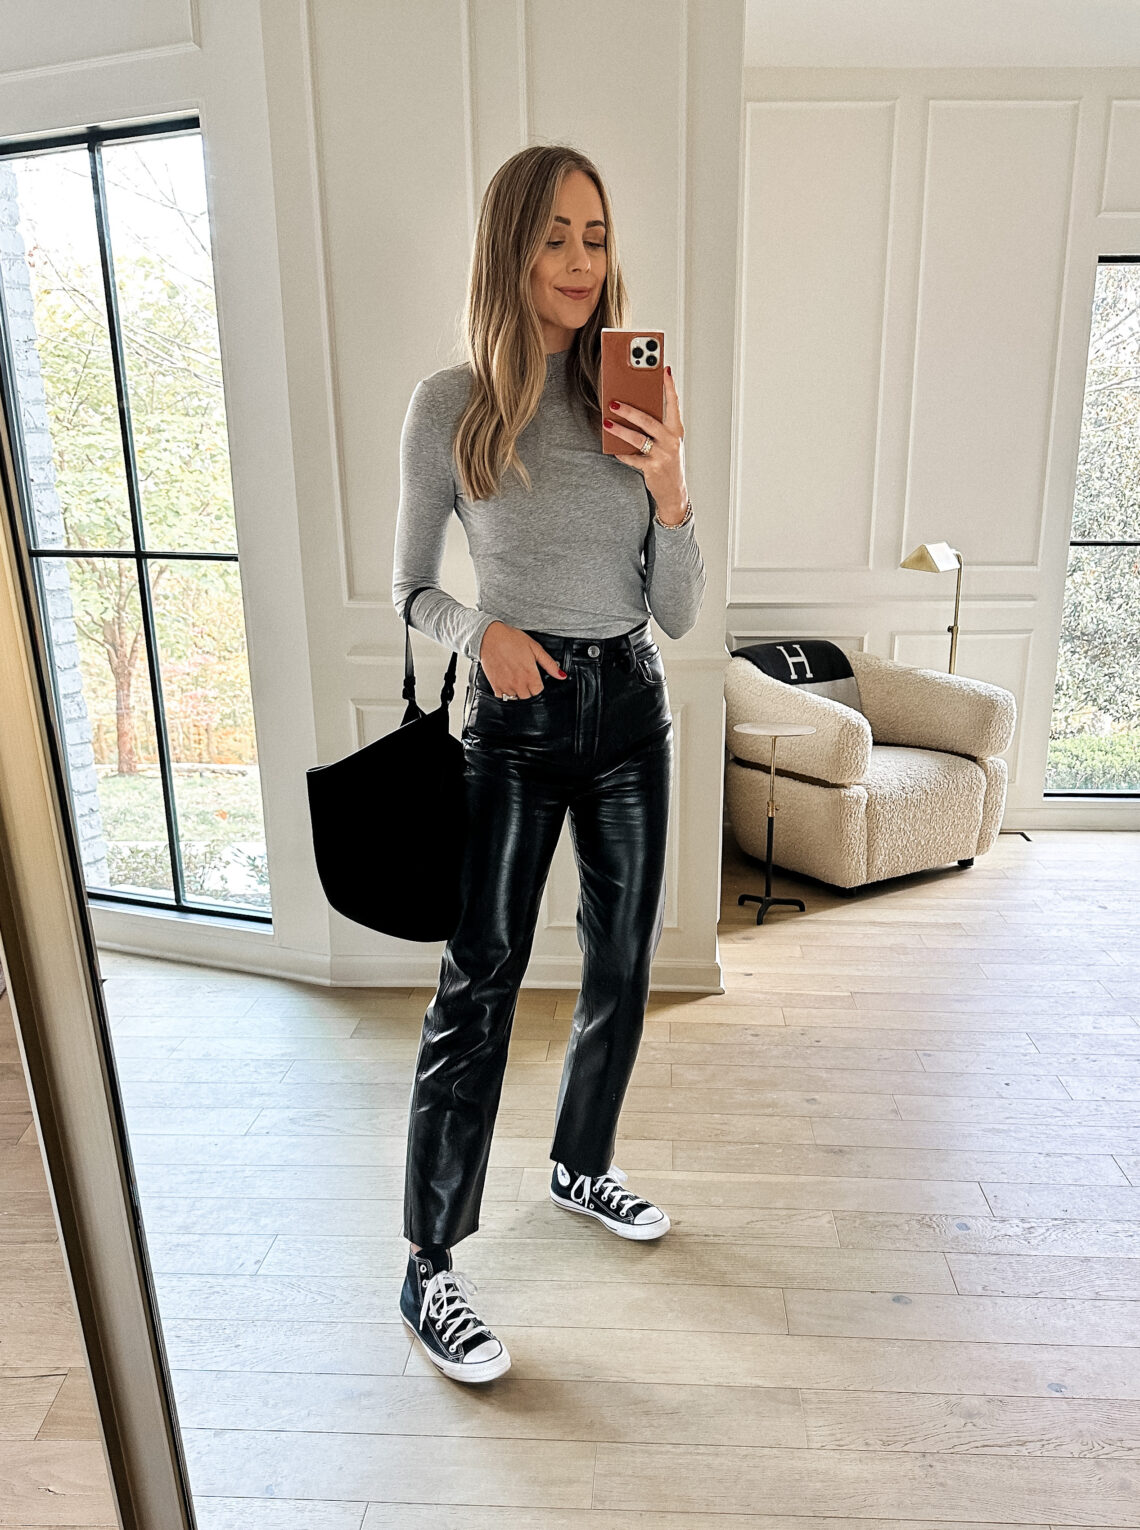 Fashion Jackson Wearing Grey Long Sleeve Mock Neck Top AGOLDE Recycled Leather Black Pants Converse Black High Top Sneakers Khaite Black Suede Lotus Handbag Casual Fall Outfit